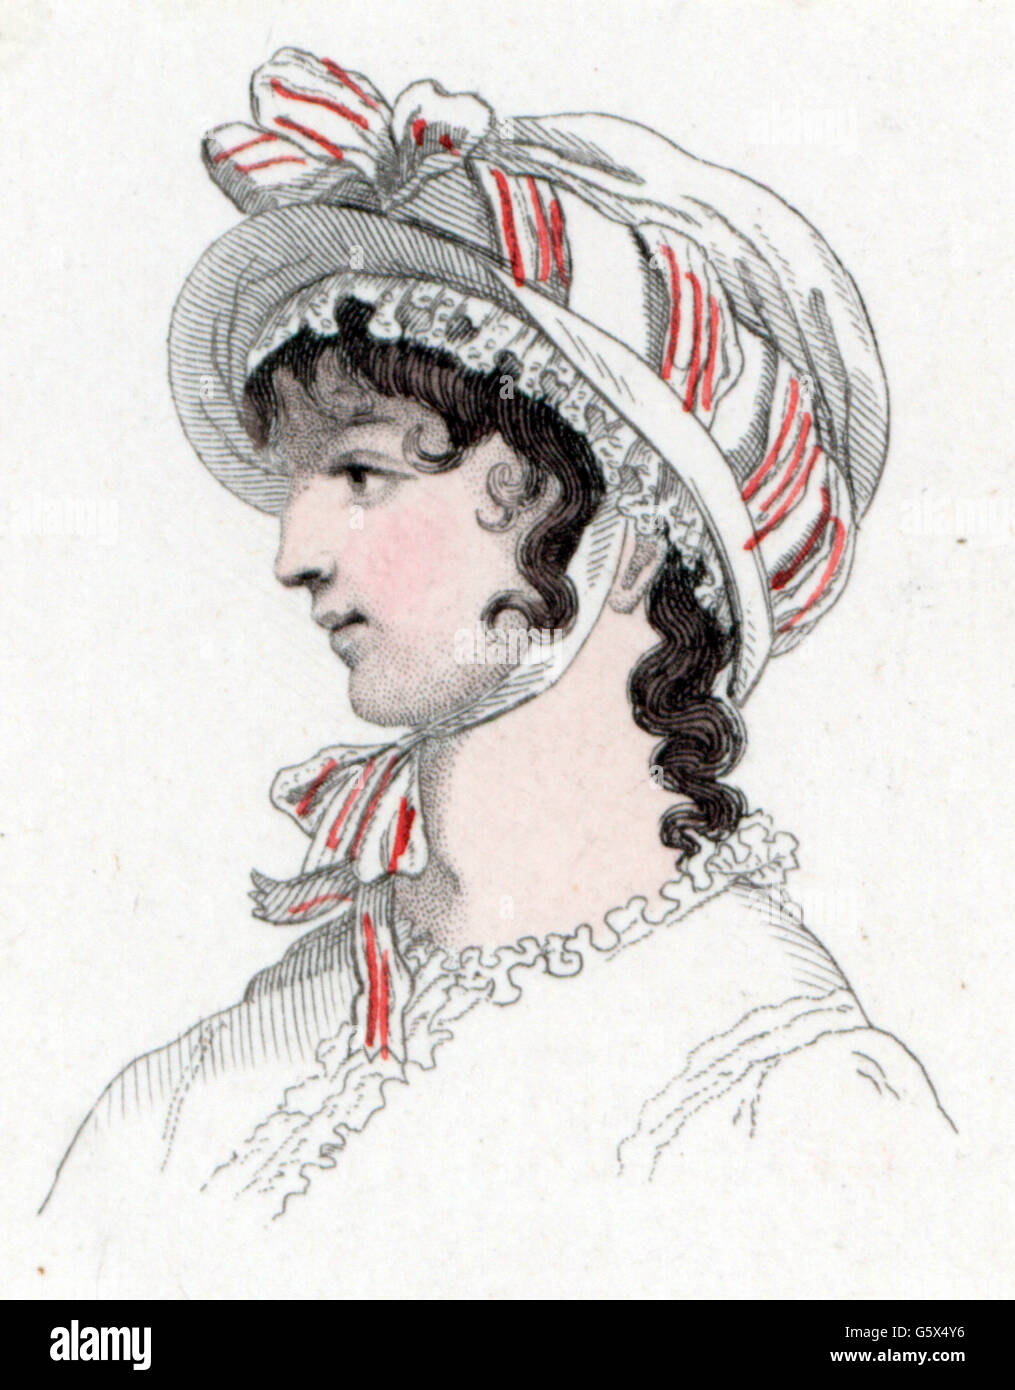 fashion, 19th century, woman with summer hat, 1803, Additional-Rights-Clearences-Not Available Stock Photo